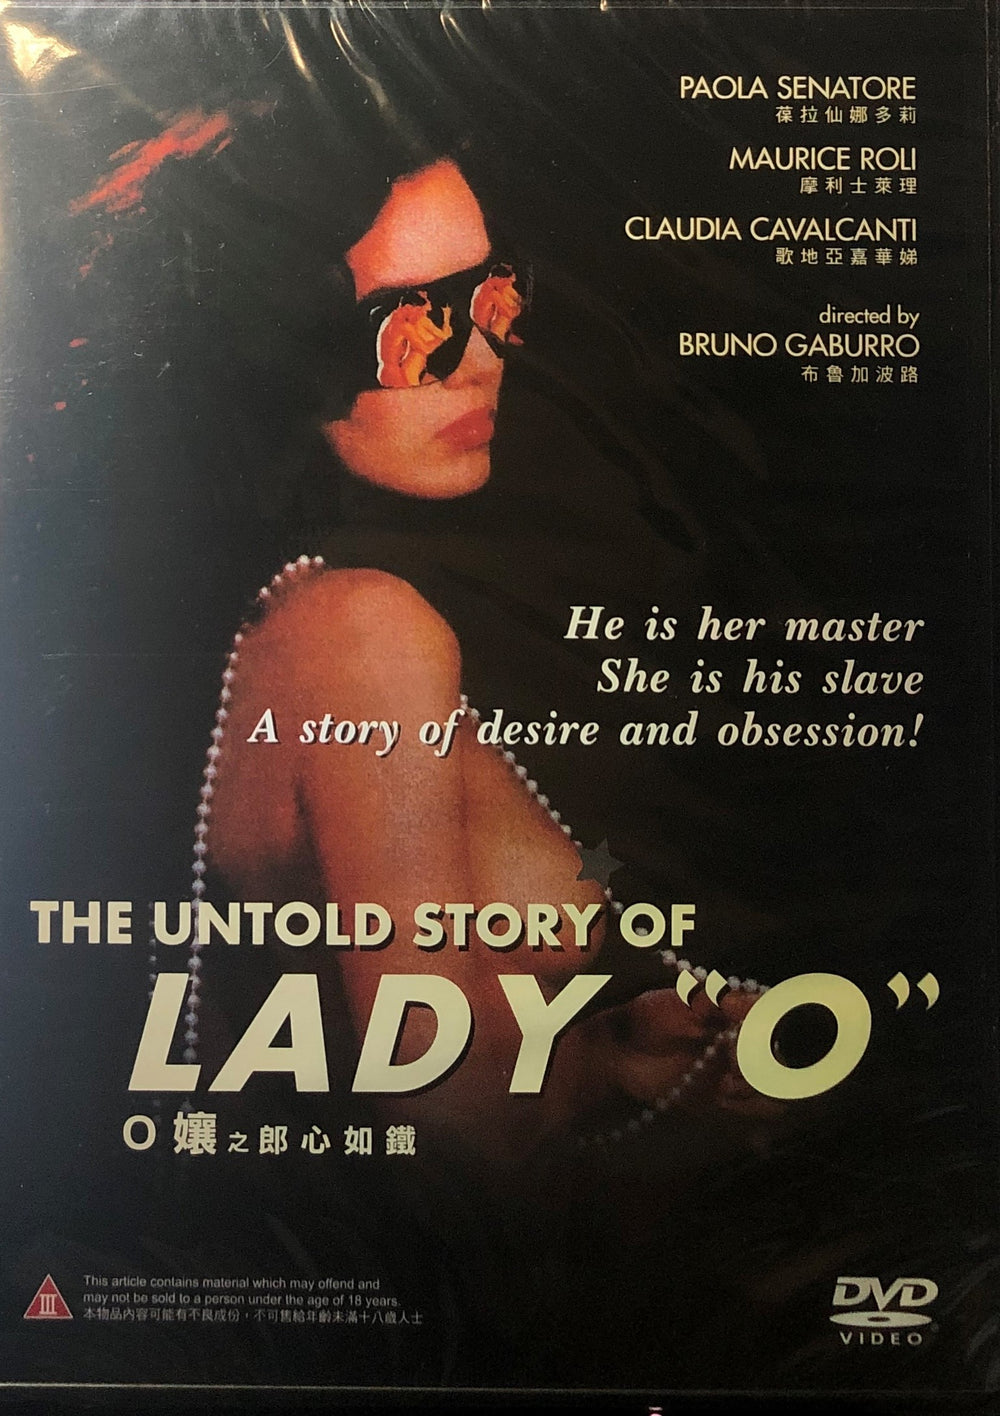 THE UNTOLD STORY OF LADY 